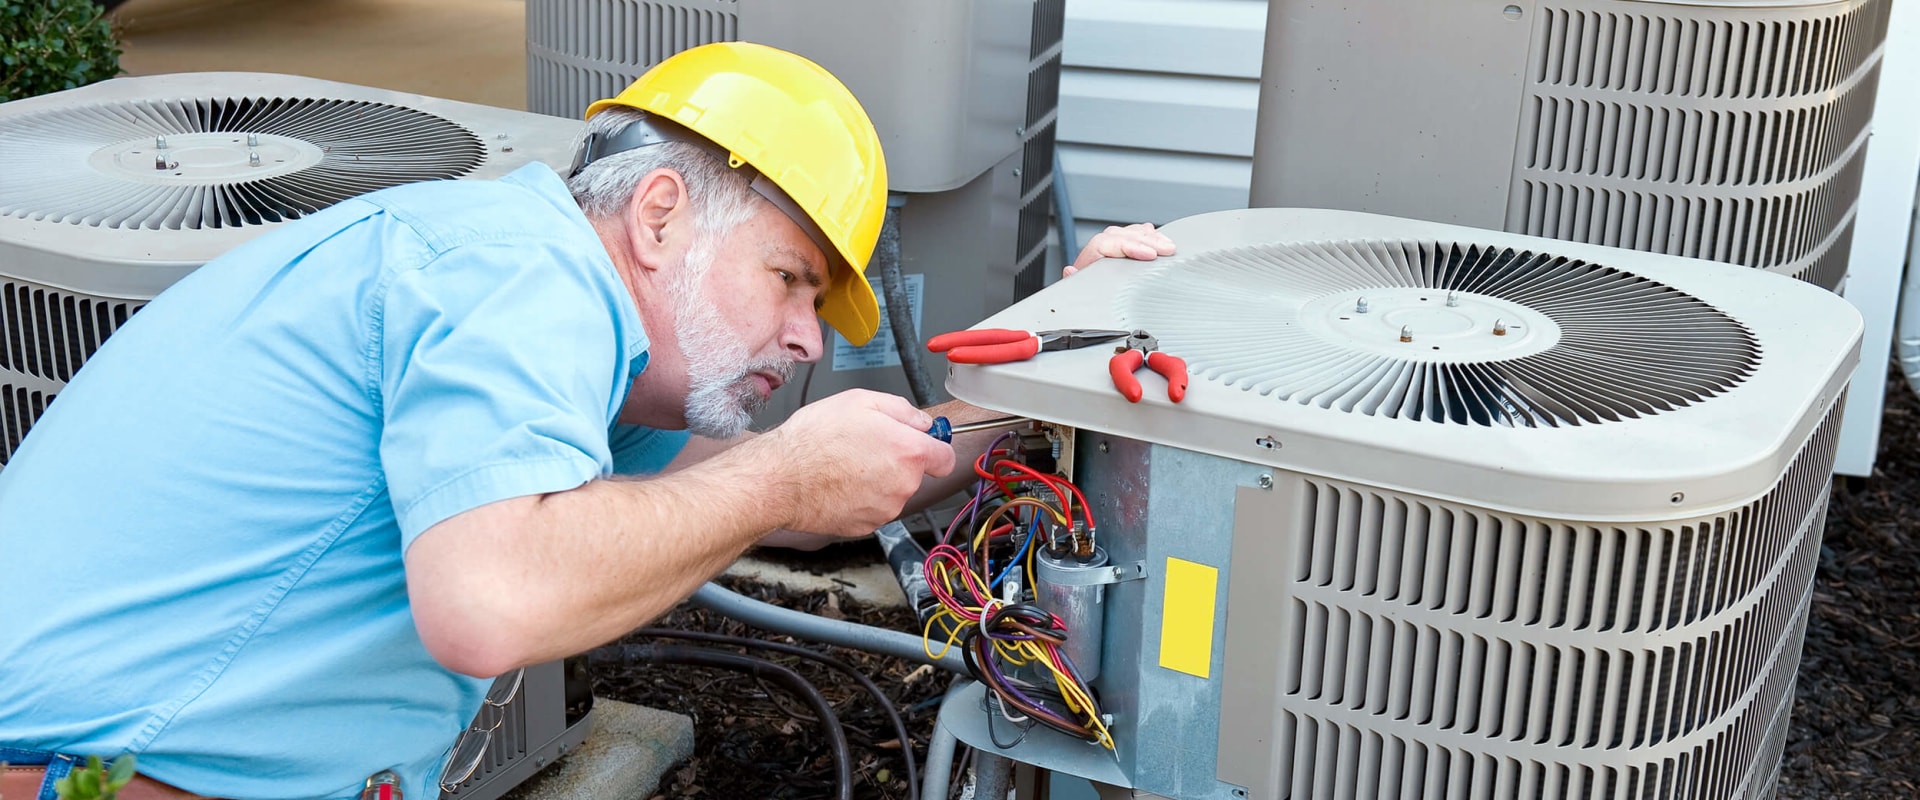 Does HVAC Maintenance in Coral Springs, FL Offer Free Consultations?